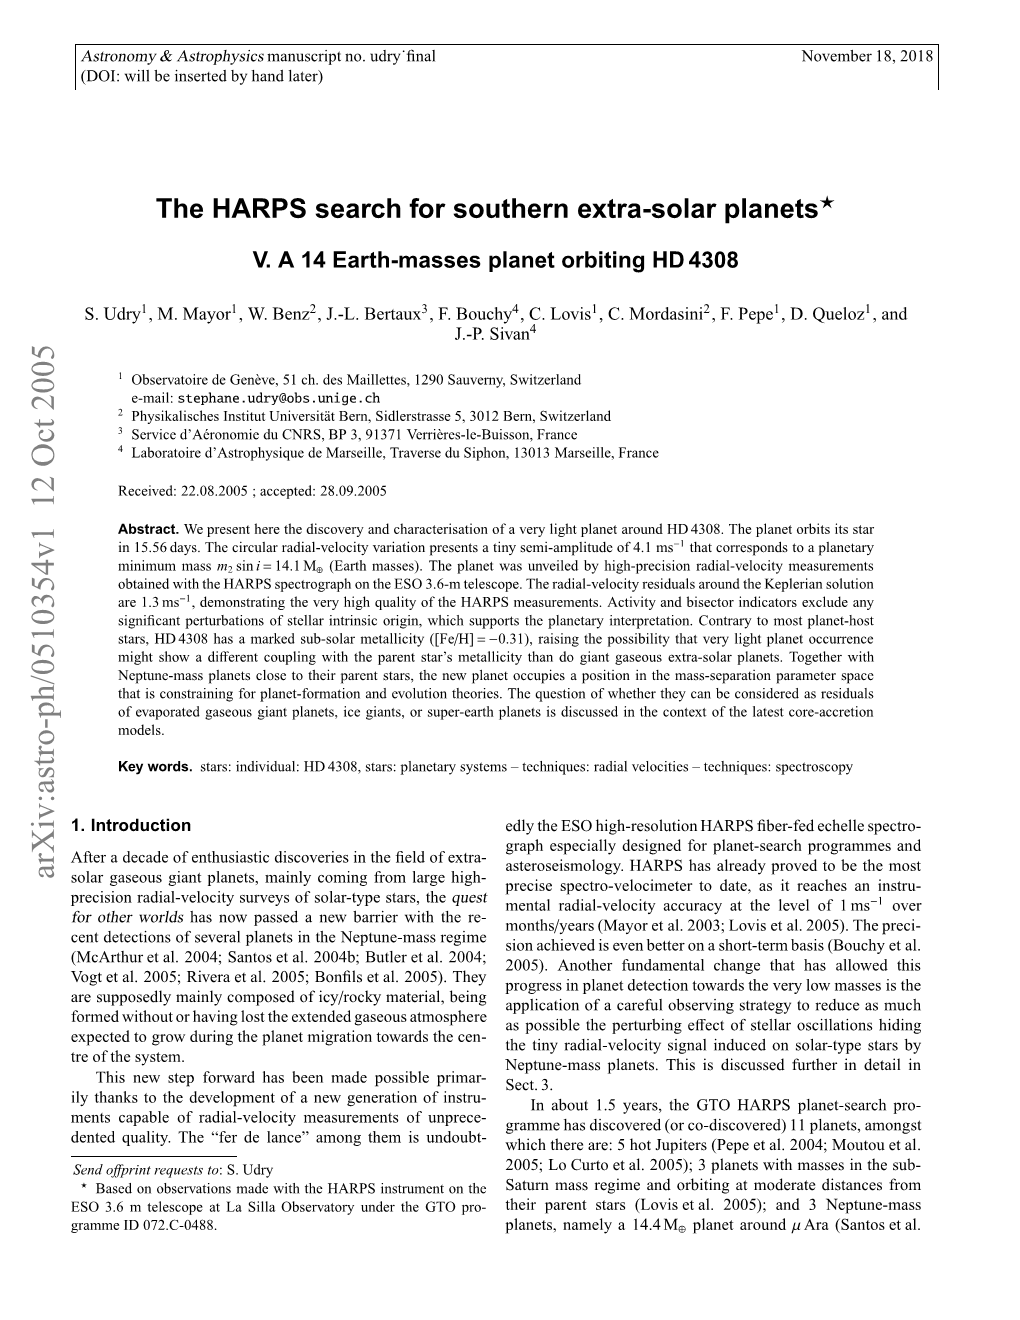 The HARPS Search for Southern Extra-Solar Planets V. a 14 Earth